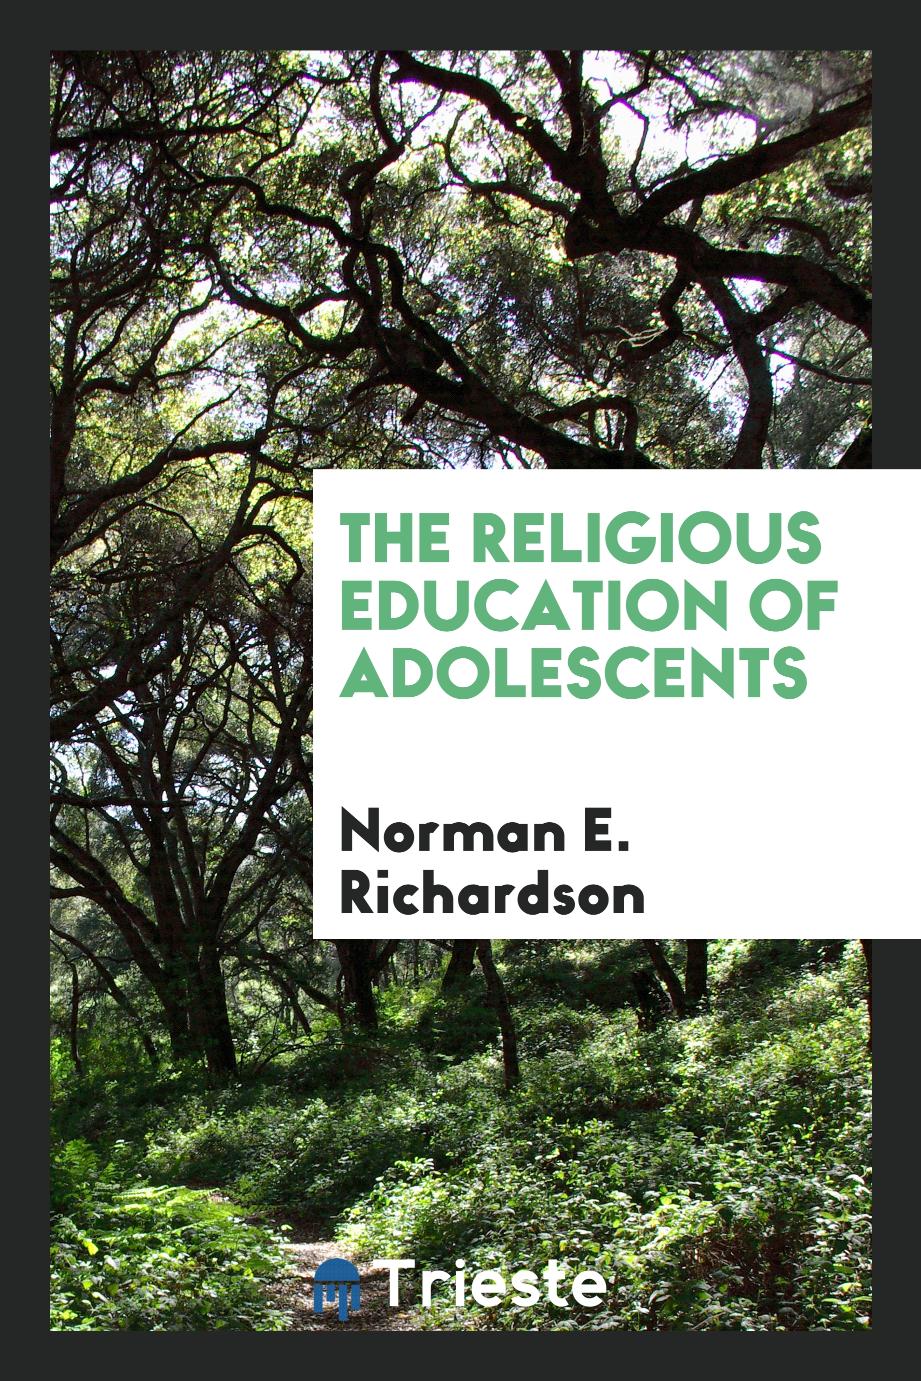 The religious education of adolescents